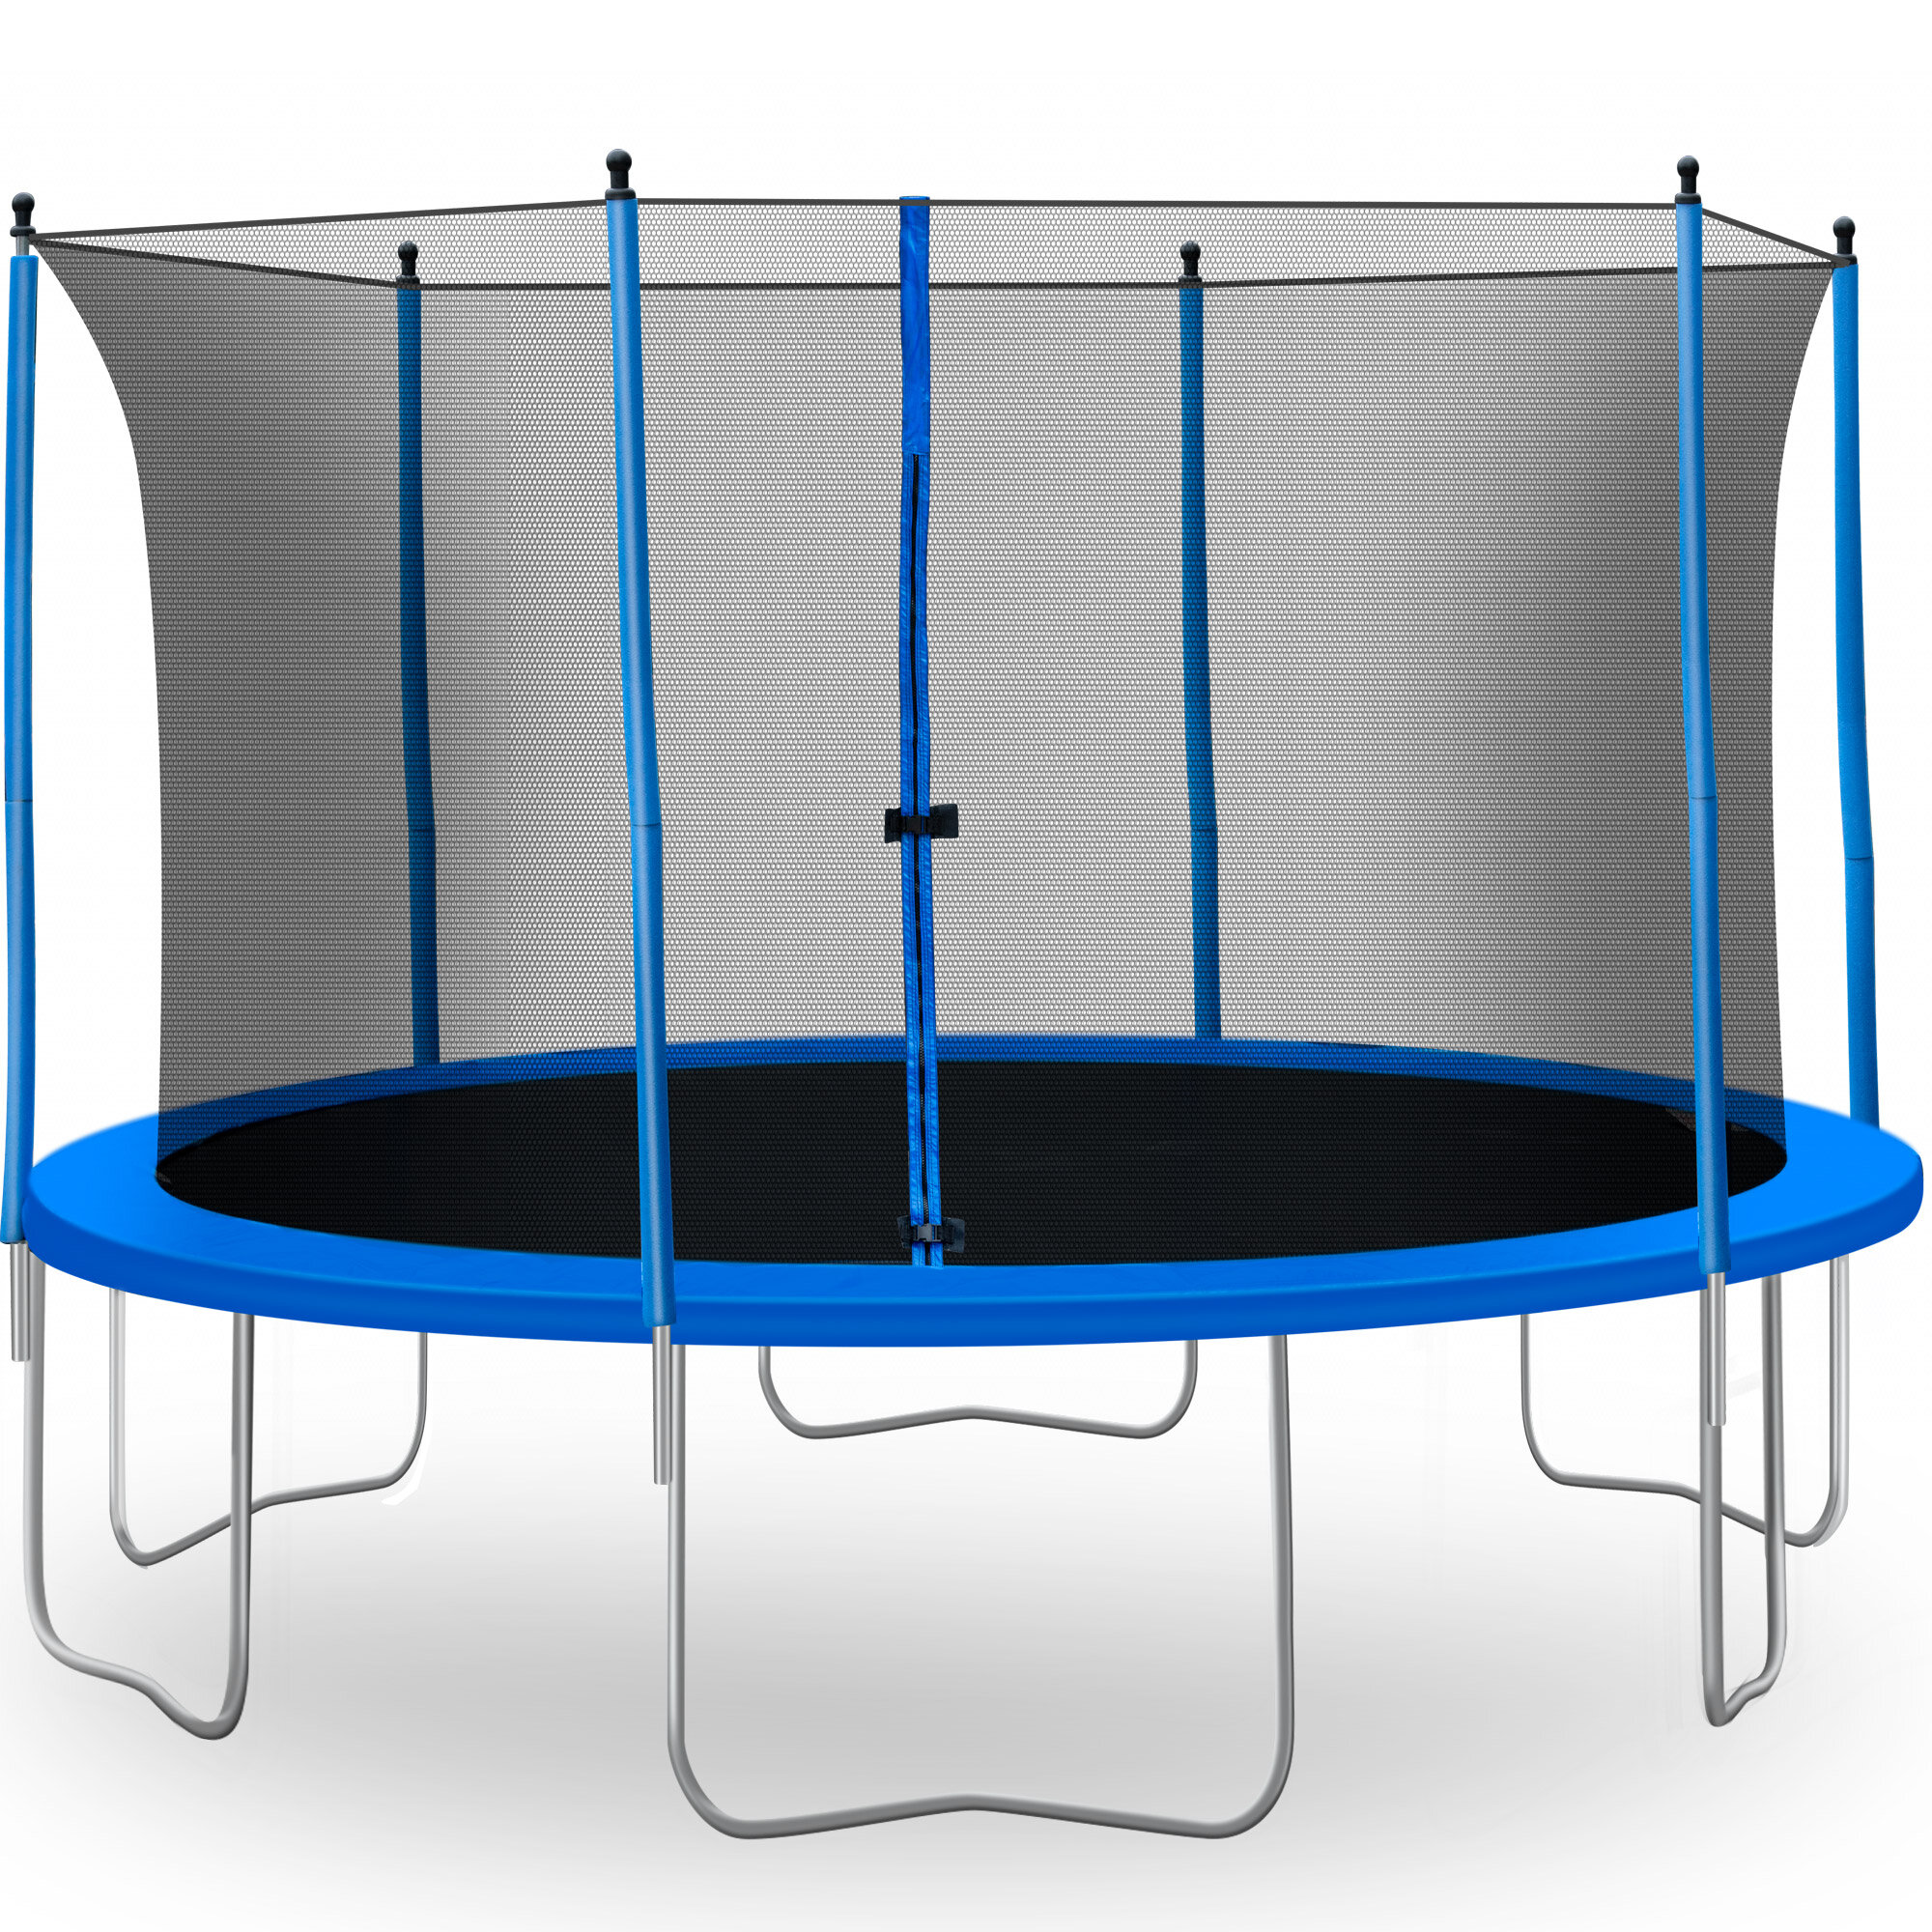 

[USA Direct] 13FT Trampoline Jumping Bed Bungee Fitness Equipment with Safety Protective Net Max Load 330lbs